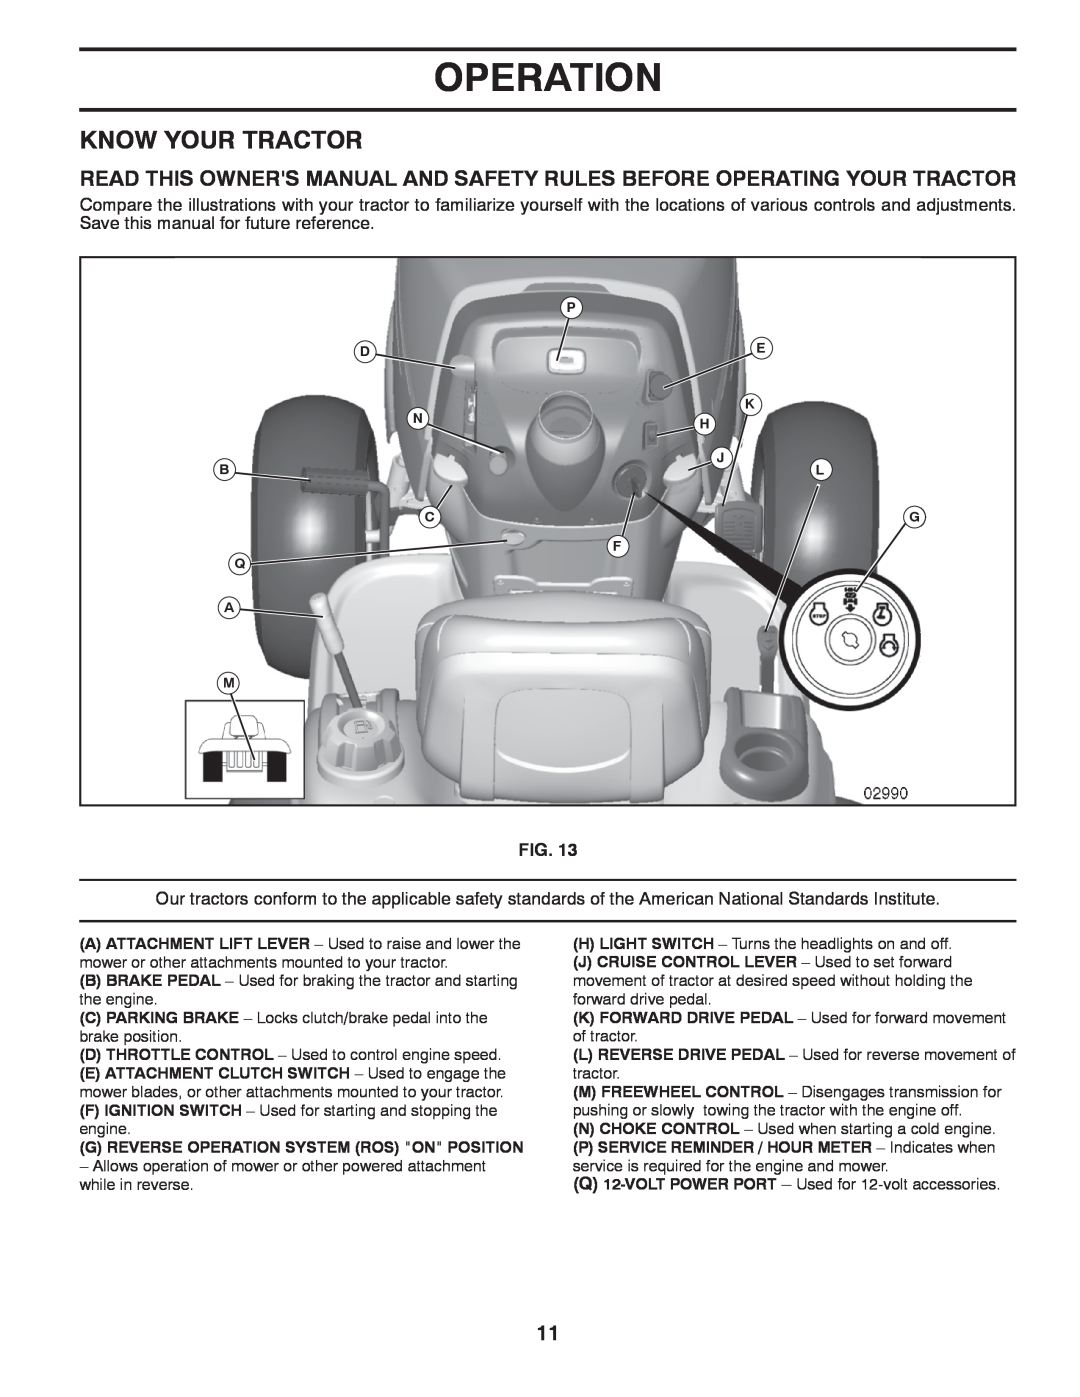 Poulan 423349 manual Know Your Tractor, G Reverse Operation System Ros On Position 